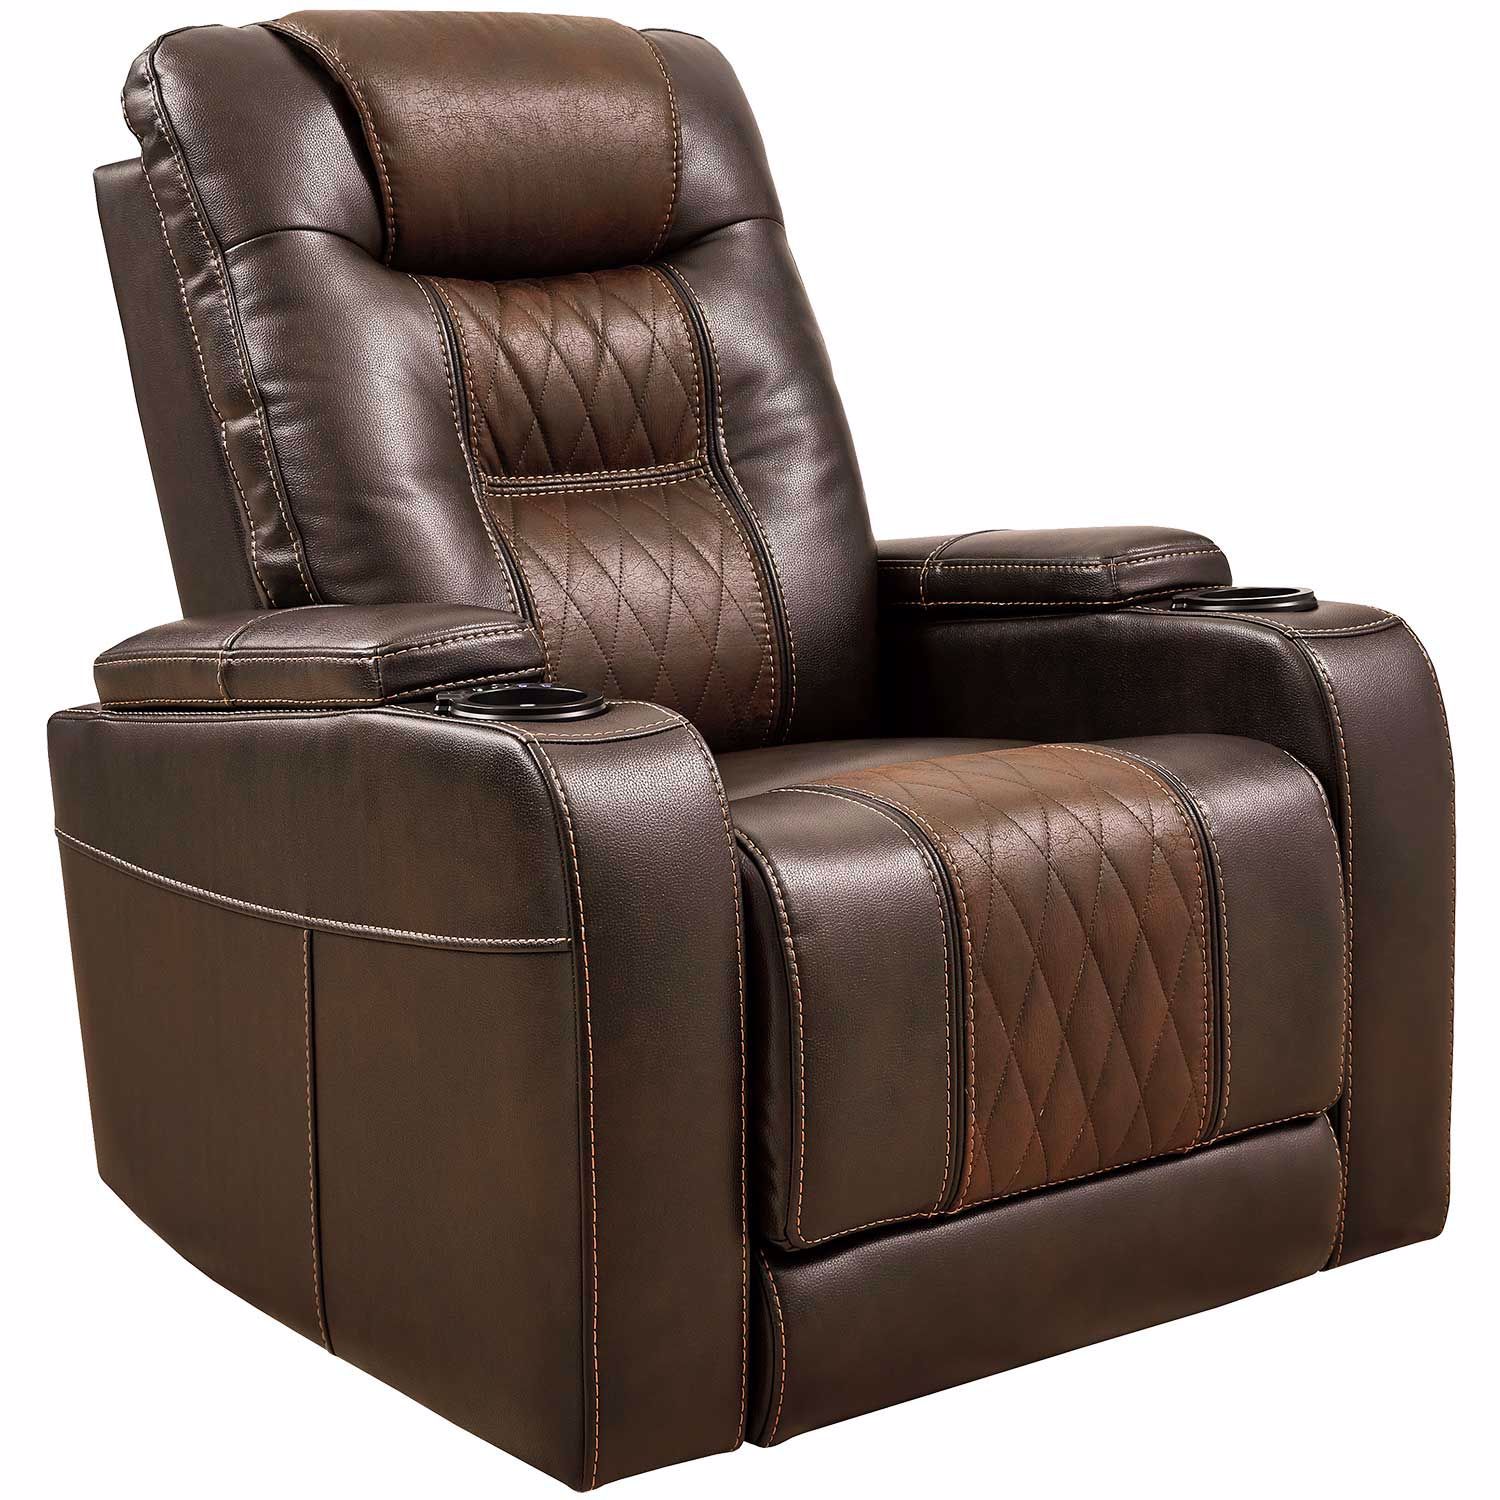 Composer Brown Power Recliner with Adjustable Headrest 2150713 | Ashley